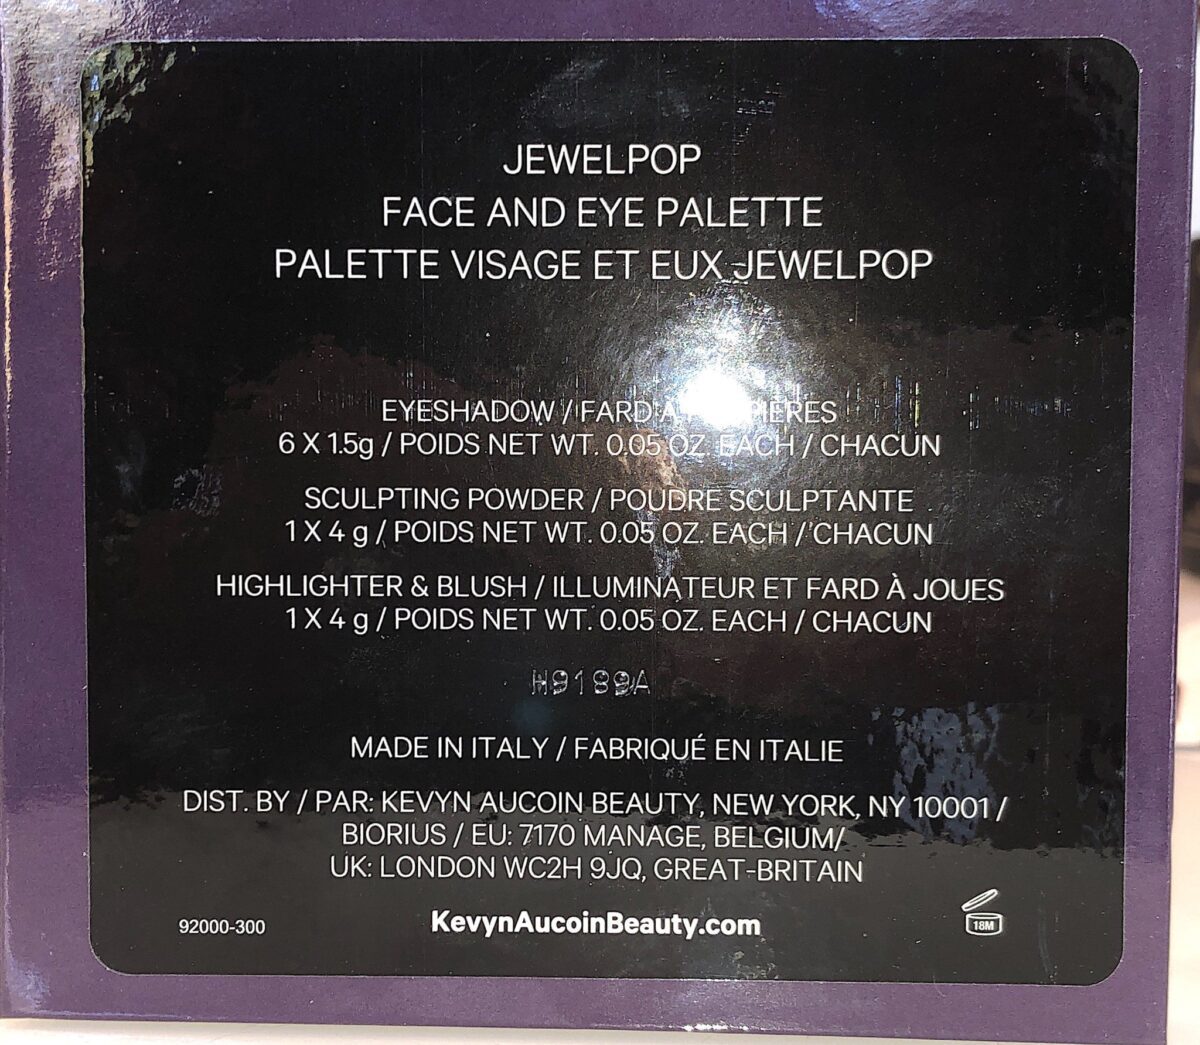 THE BACK OF THE KEVYN AUCOIN JEWEL POP PALETTE